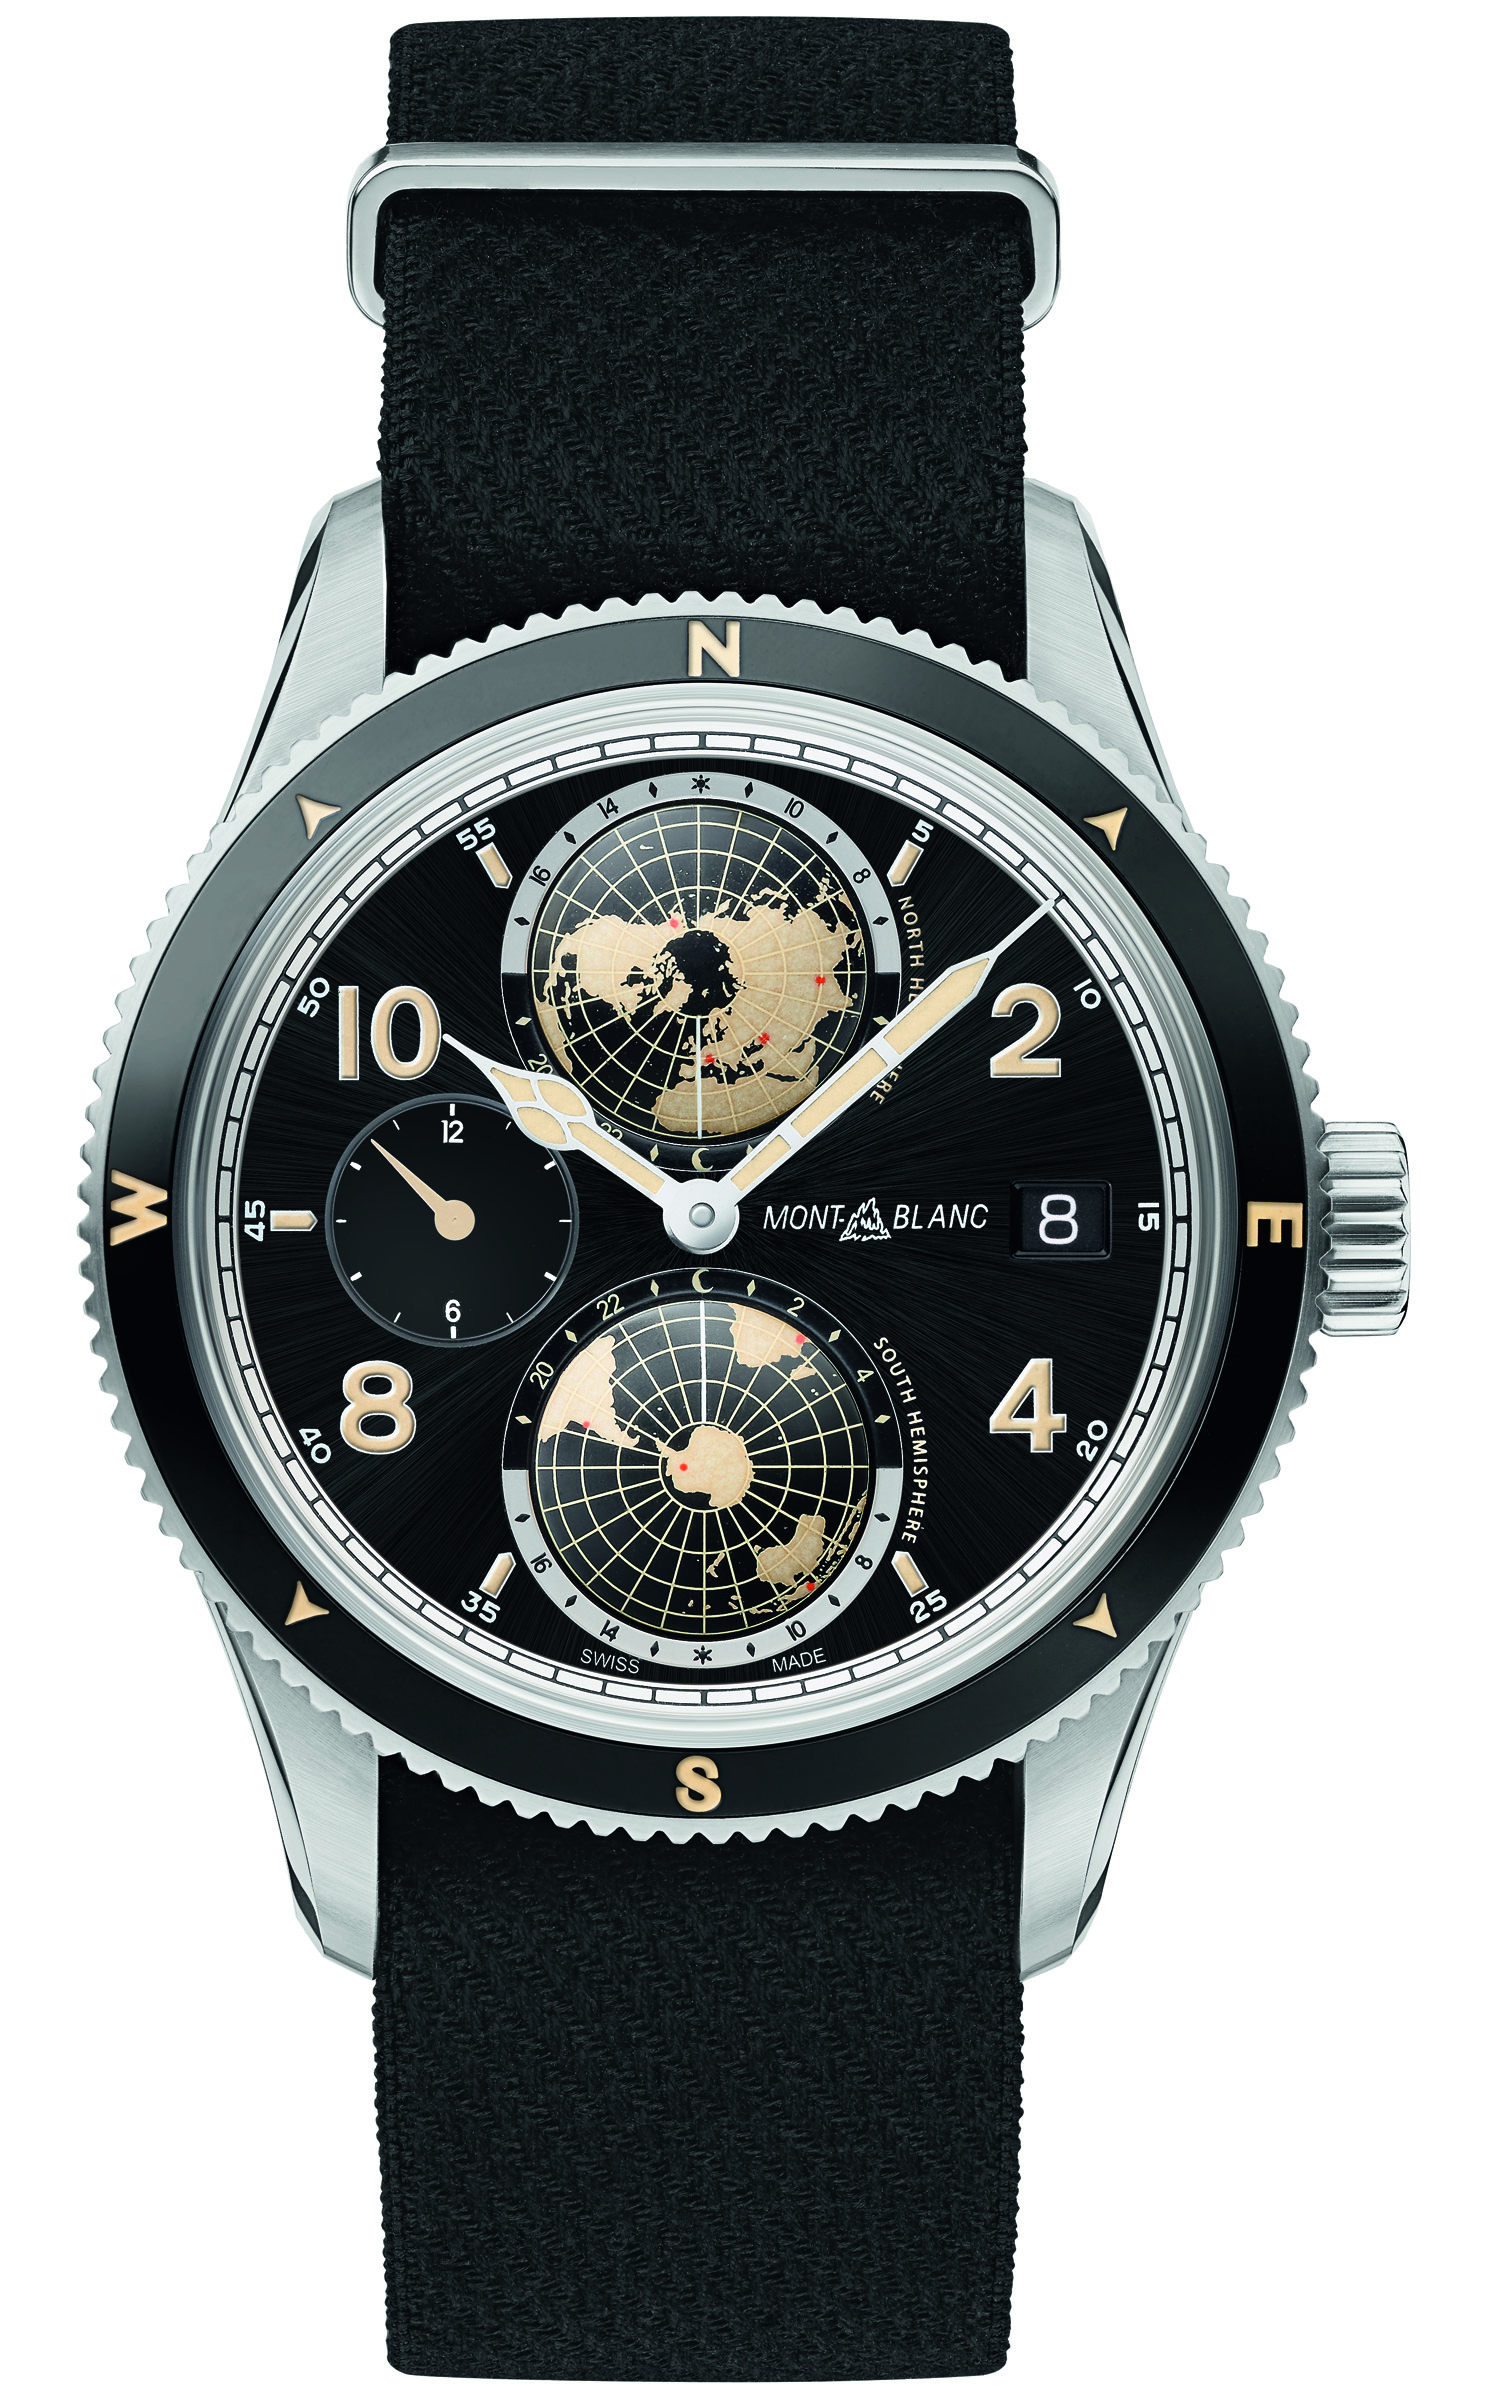 Montblanc 1858 Geosphere Limited Edition 1858. A new bidirectional stainless steel or bronze bezel with shiny black ceramic completes the design.